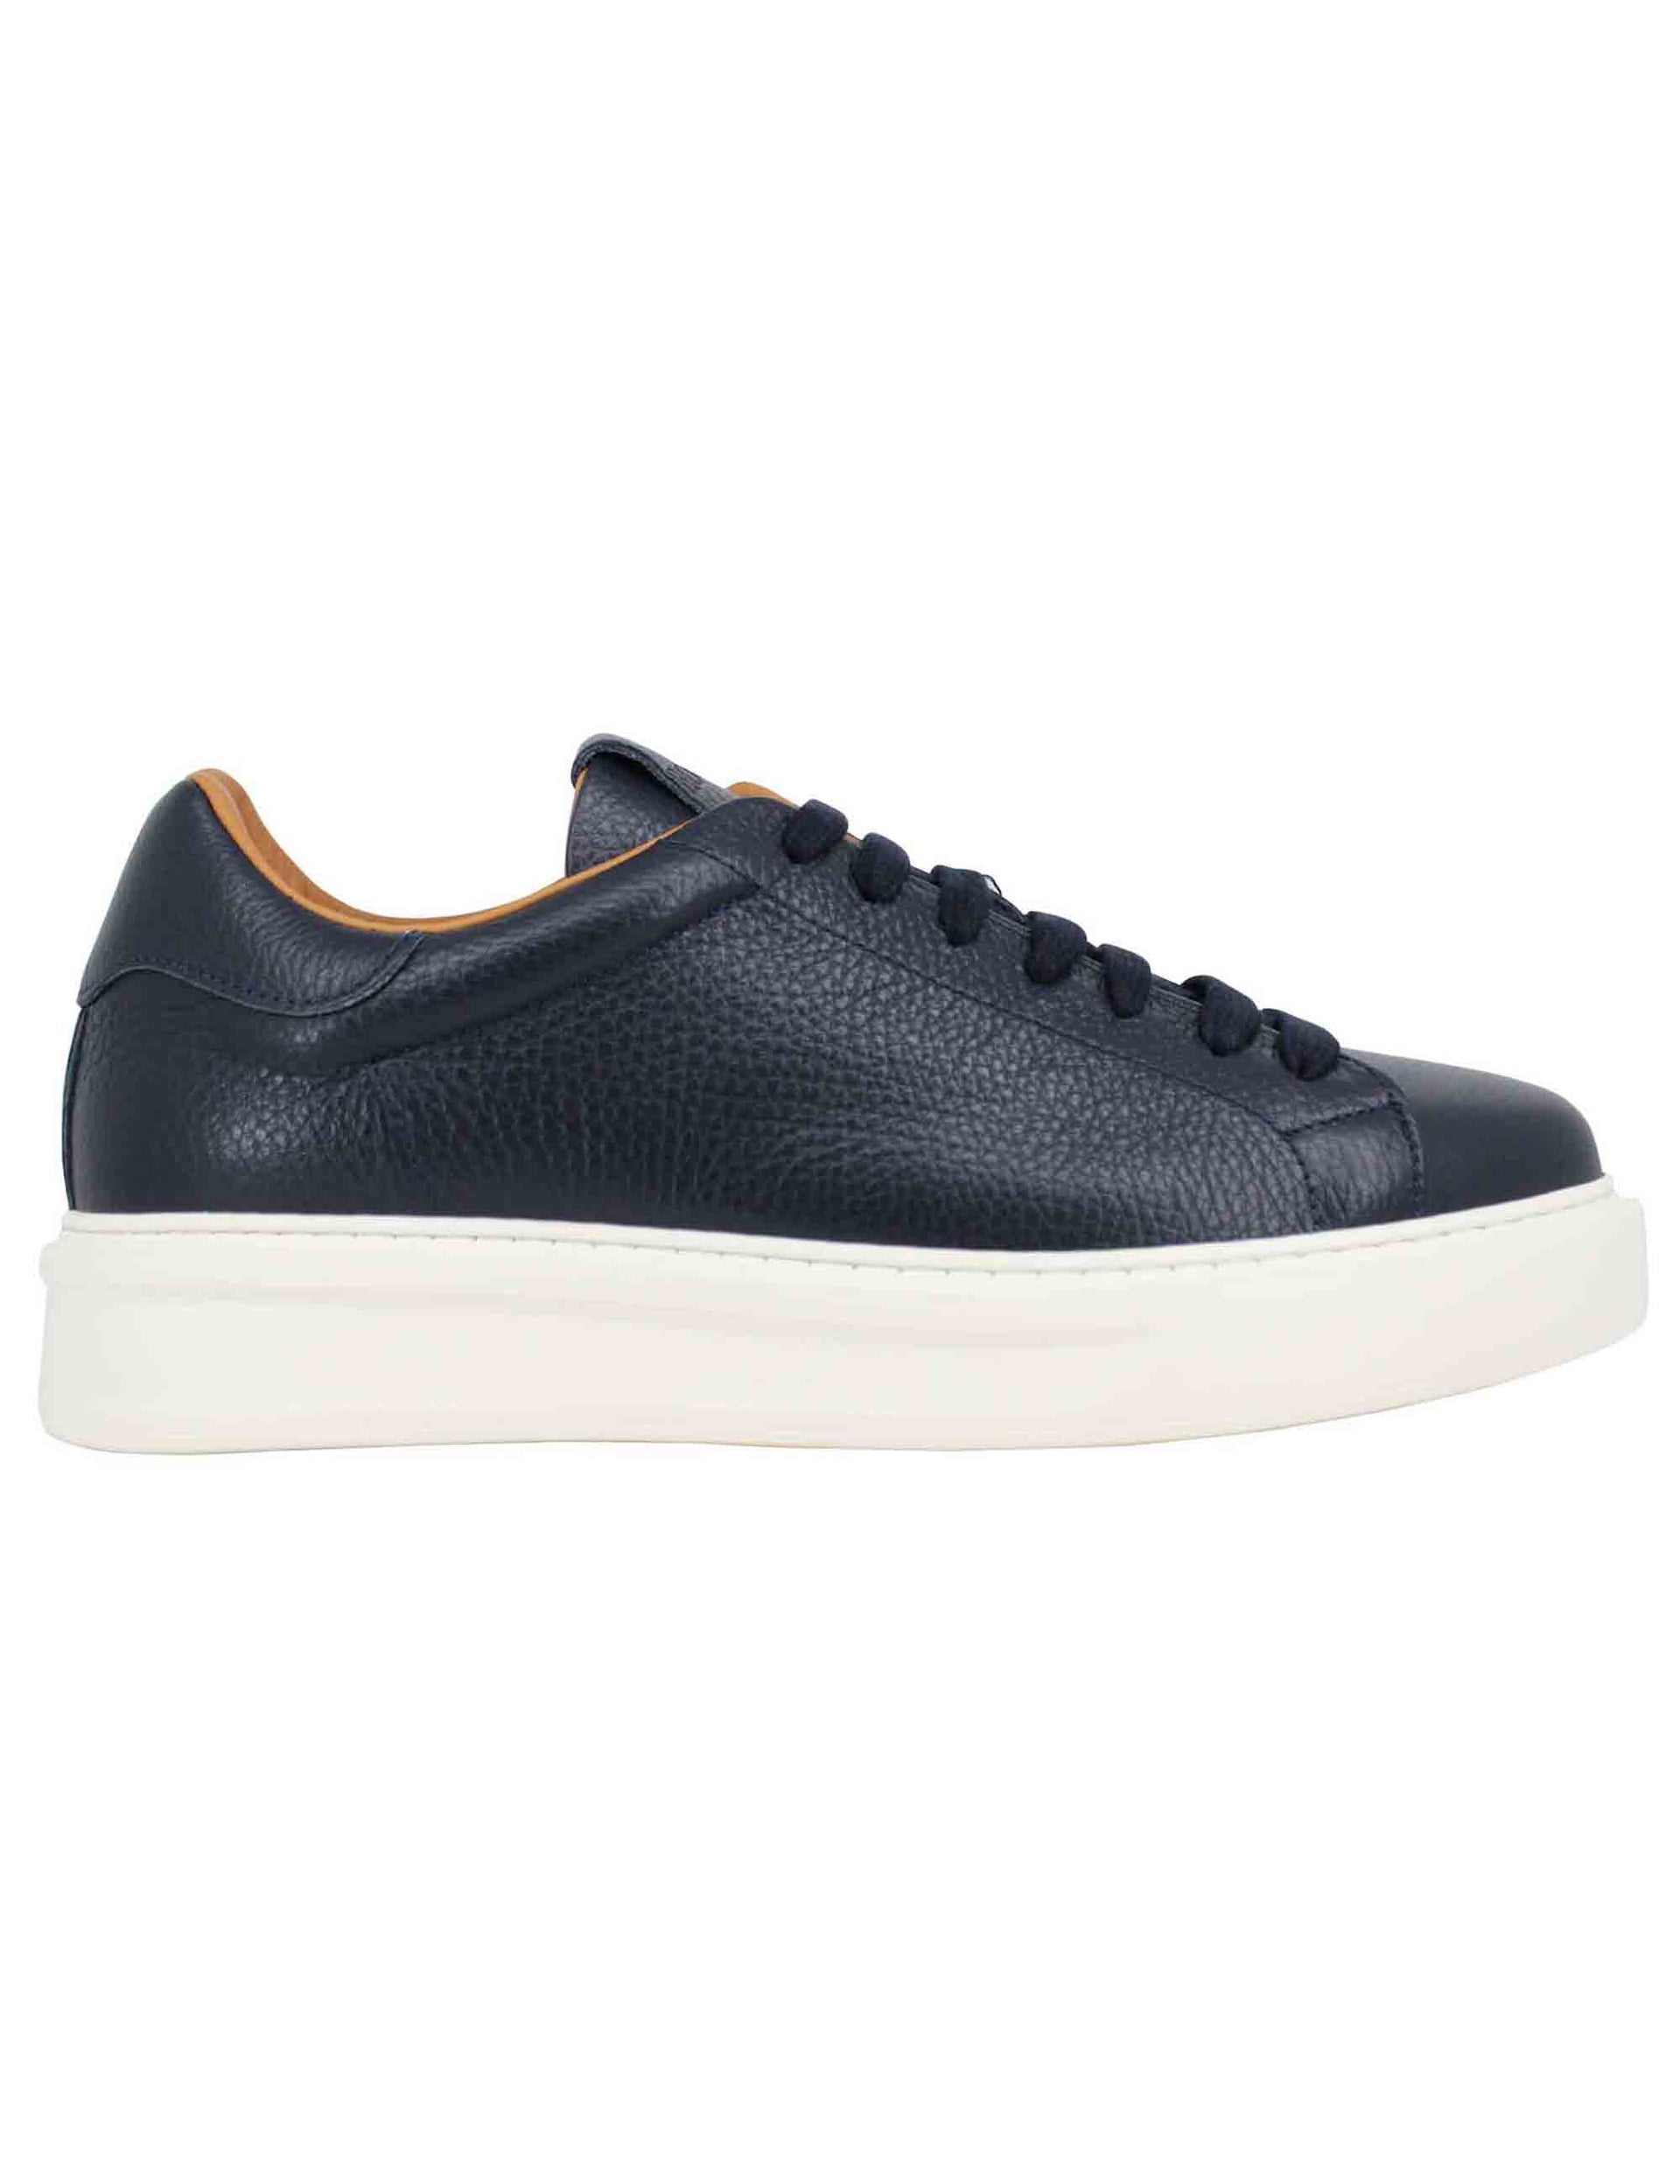 Men's sneakers in hammered blue leather with high rubber sole